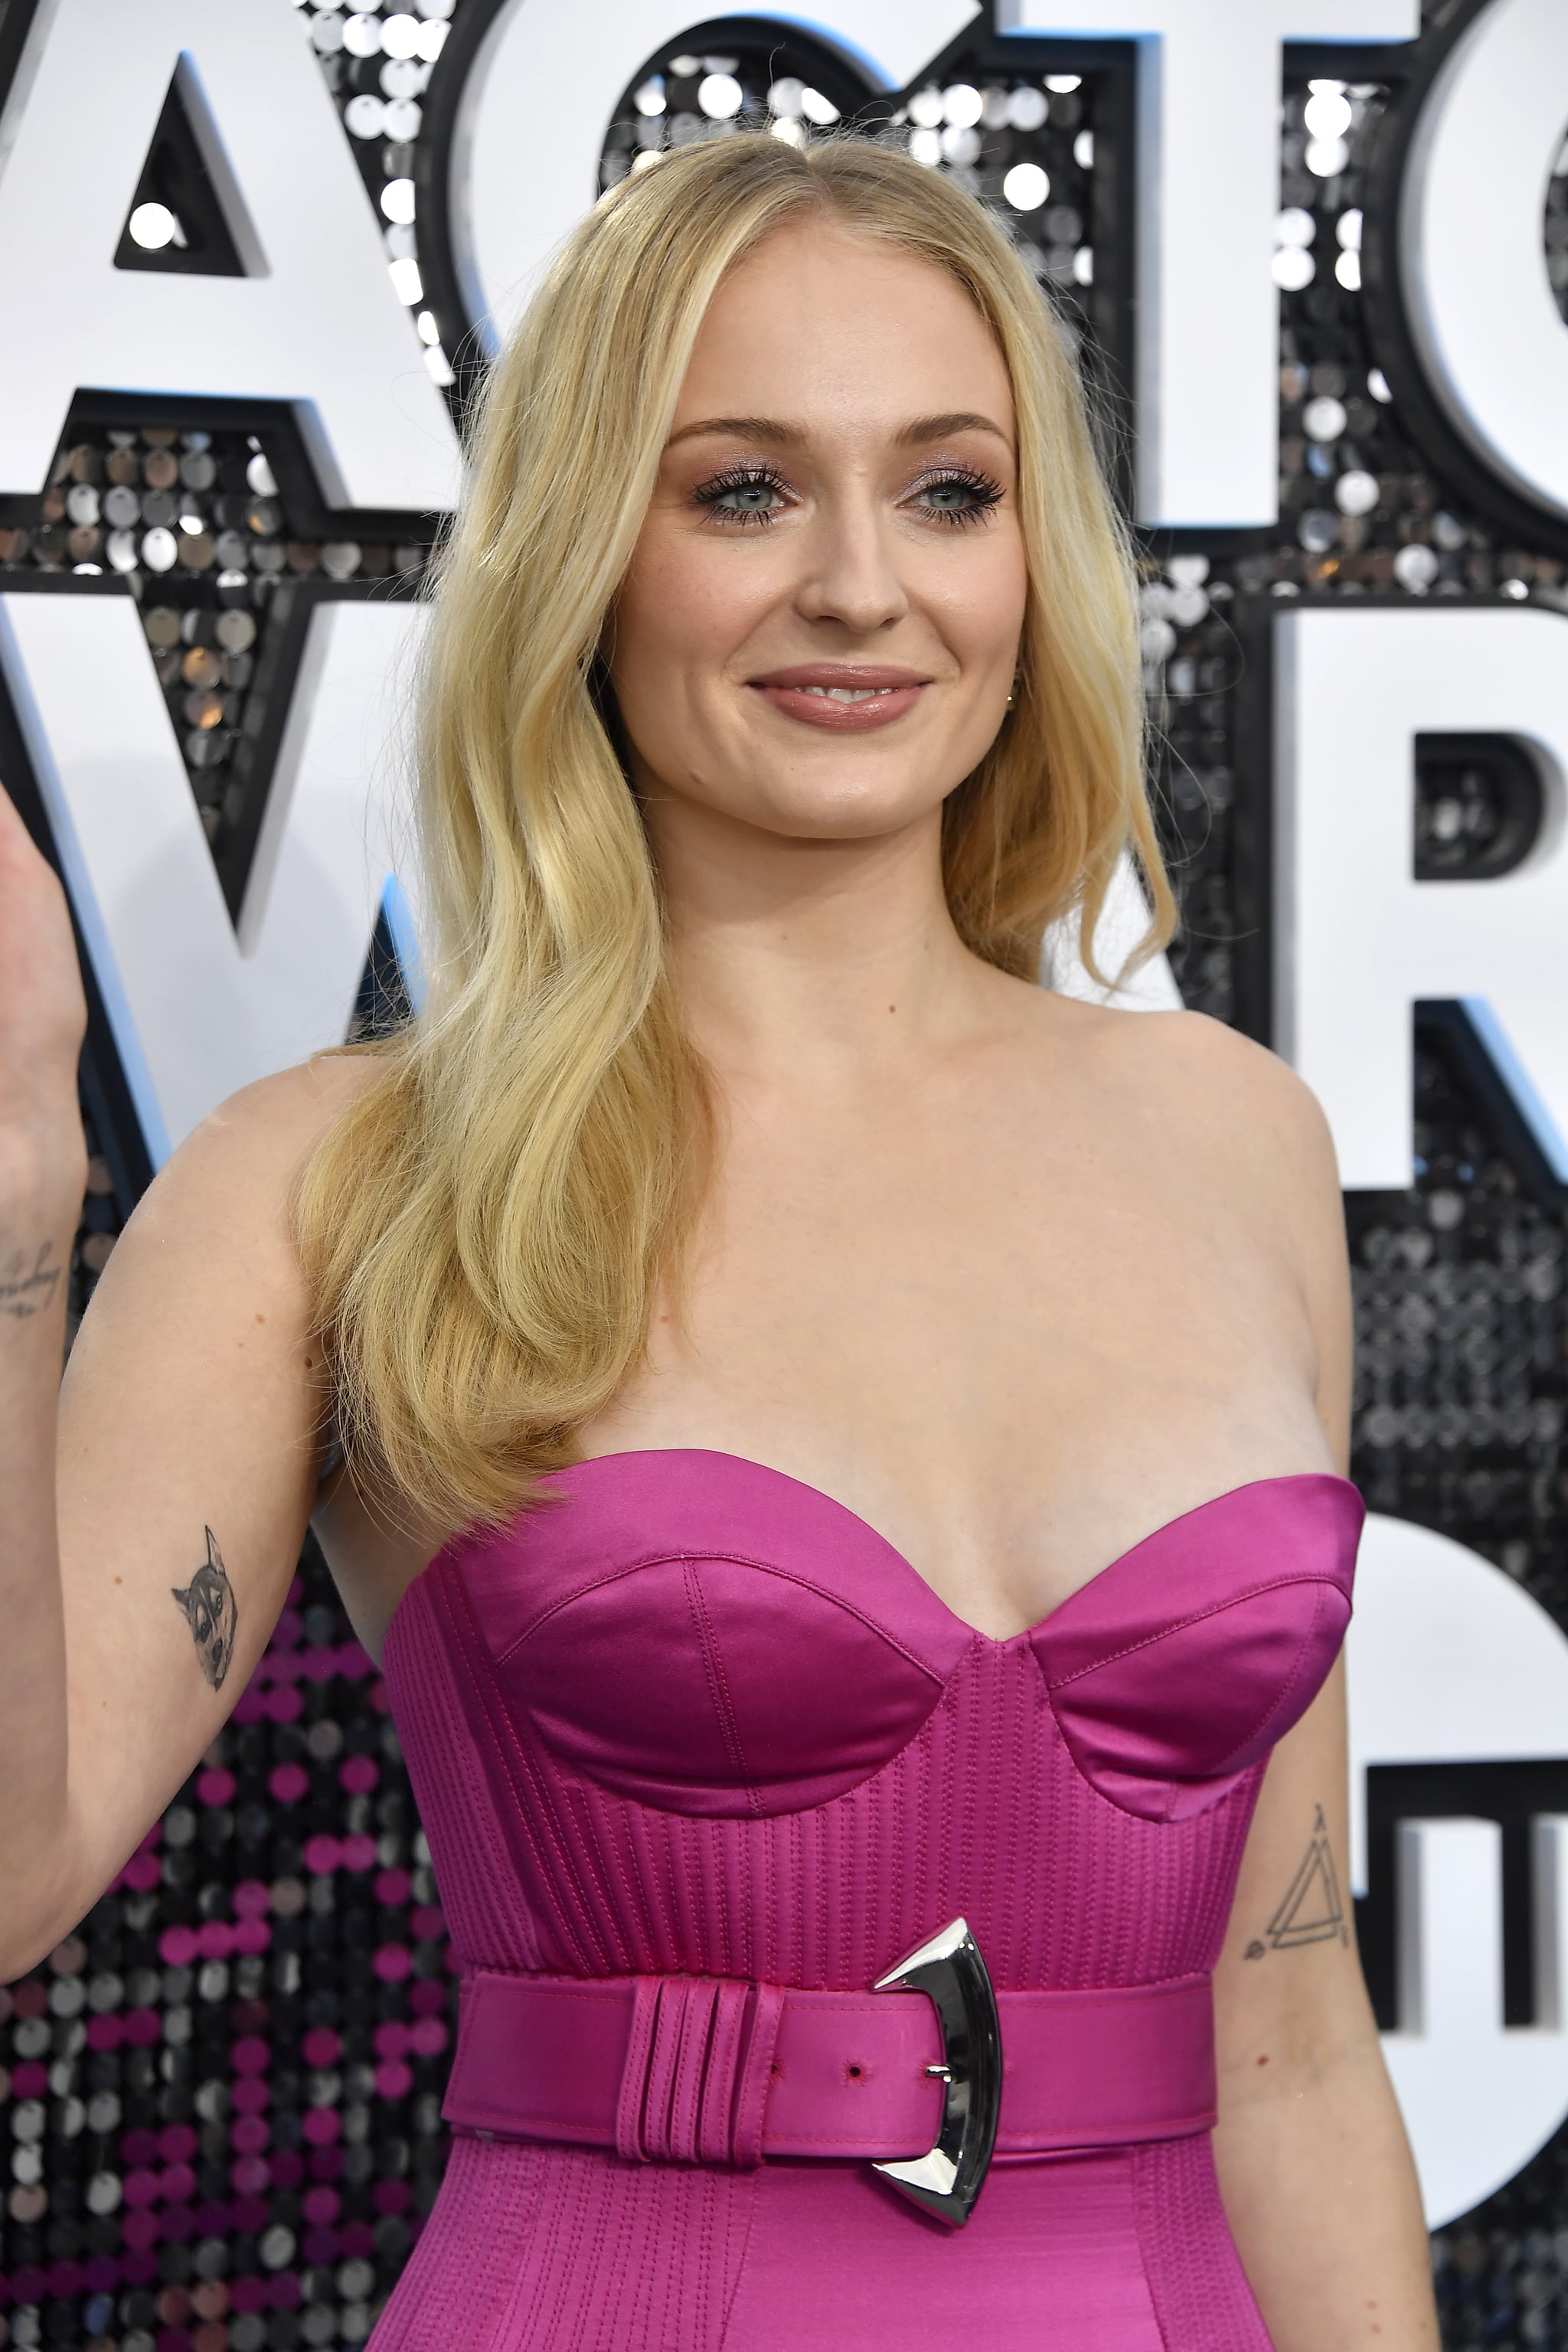 Sophie Turner leads official Game of Thrones reunion at 2020 SAG